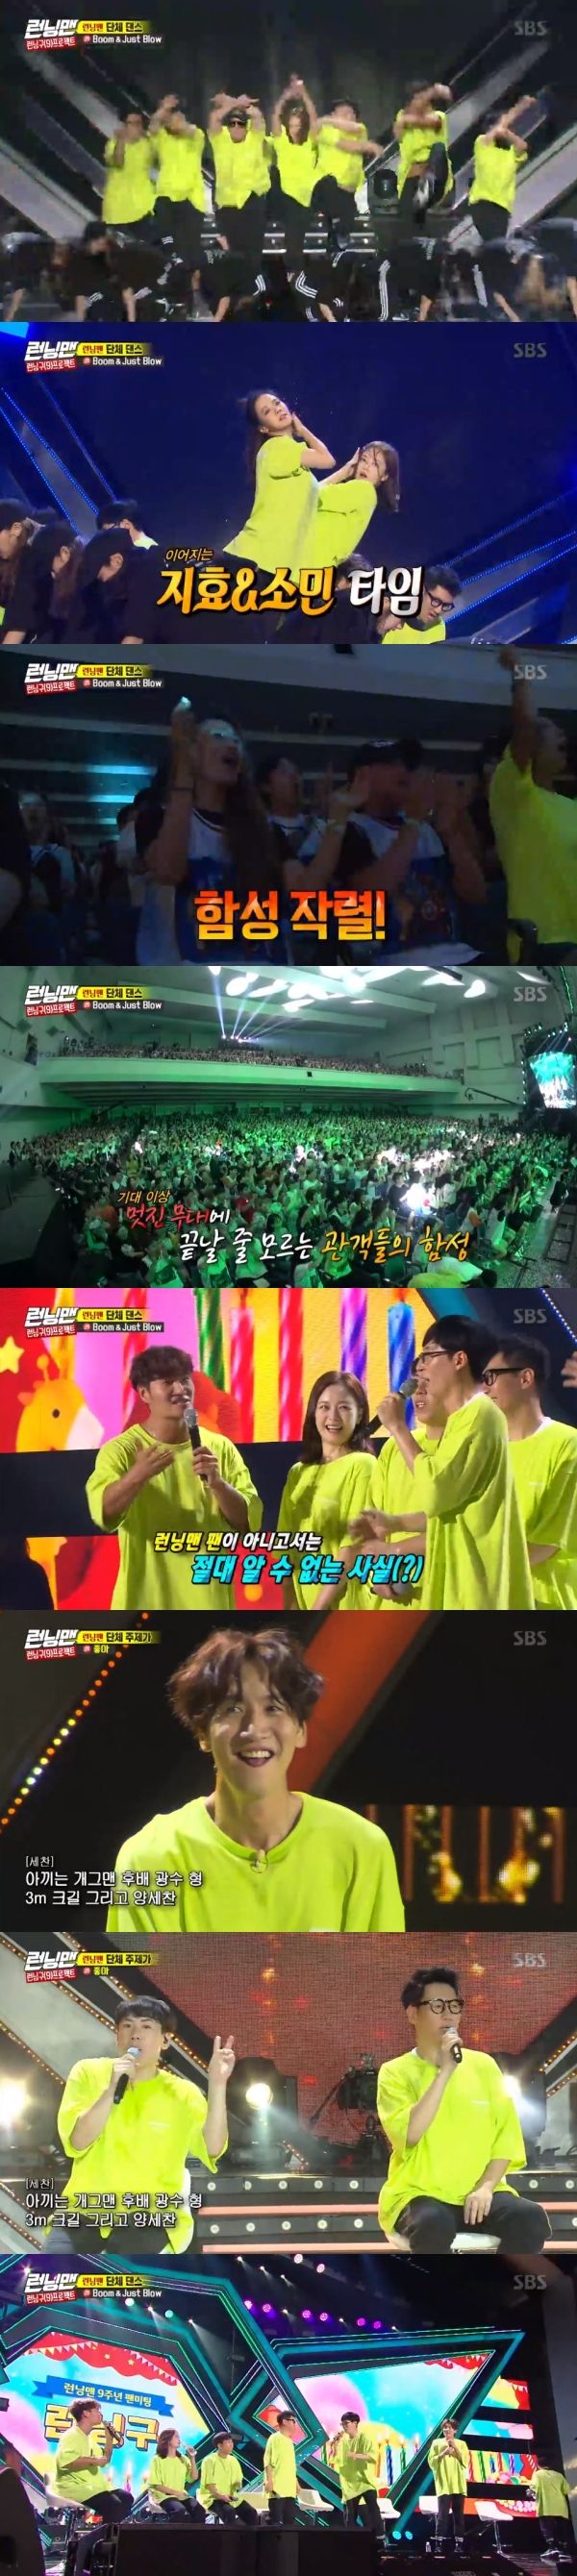 Running Man had a fan meeting for nine-year anniversary.On SBS Running Man broadcasted on the 22nd, Running District (9) Project showed the performances of Running Man members in front of fans.On this day, the members made a team name with Hyochan Park, Yoo Jae-Suk and Fkiller and showed the Collabo stage.Prior to the stage, members of Hyochan Park Song Ji-hyo, Yang Se-chan, Nucksal and Kodkunst gathered in the recording room.No matter how good you are, youre dragging it three times on the basis, said Kodkunst, who was the main director. Yang Se-chan jokingly replied, Ill have to throw the basic three times in the first half.After recording in a cheerful atmosphere, the performers started to perform. On stage, Hyochan Park caught the attention with its brilliant rap skills and stage manners.The addictive refrain of four years old led to fans reactions, and Song Ji-hyo, who appeared on the lift, focused his attention on the lyrics with authenticity.At the end of the stage, fans cheered with the support shot by Yoon Mi-rae.The following disturbance band, Jeon So-min, and Yoo Jae-Suks Jeon So-Suk and Yoo Jae-Suk team received attention for empathy lyrics.Yoo Jae-Suk told Soran, Think of it as your boyfriend who was dating Somin.Soran said, It will be very uncomfortable. They were thrilled, but they caught their attention with a wonderful look on stage.The next performances were the Fkiller spider, Kim Jong-kook and Haha teams.Jo Jung-suk, who was released before these stages, revealed the inside heart of the spider; Jo Jung-suk shook his head, saying, (I) said it would be cool, and the spider was like this. (The spider) wanted to sing Haha brother (he said), he laughed.Spider and Kim Jong-kooks vocals, which led to Hahas lead on the stage that followed, captured the audience; after the stage, Haha said, Its so big to be with you two.If it wasnt for the bridge, I would have shown you the dance, the spider added.Following the stage of Hong Jin-young, who appeared as a guest on the day, Running Man members showed a group dance stage.After the stage, Ji Suk-jin said, This feeling is 20 years old. Song Ji-hyo showed tears.The members who chorused the last group theme song gave a warm heart to each song with their own personality.After the stage, Yoo Jae-Suk said, We are nine-year anniversaries.Kim Jong-kook expressed his aspirations to to (do) until the day of his 100th birthday.